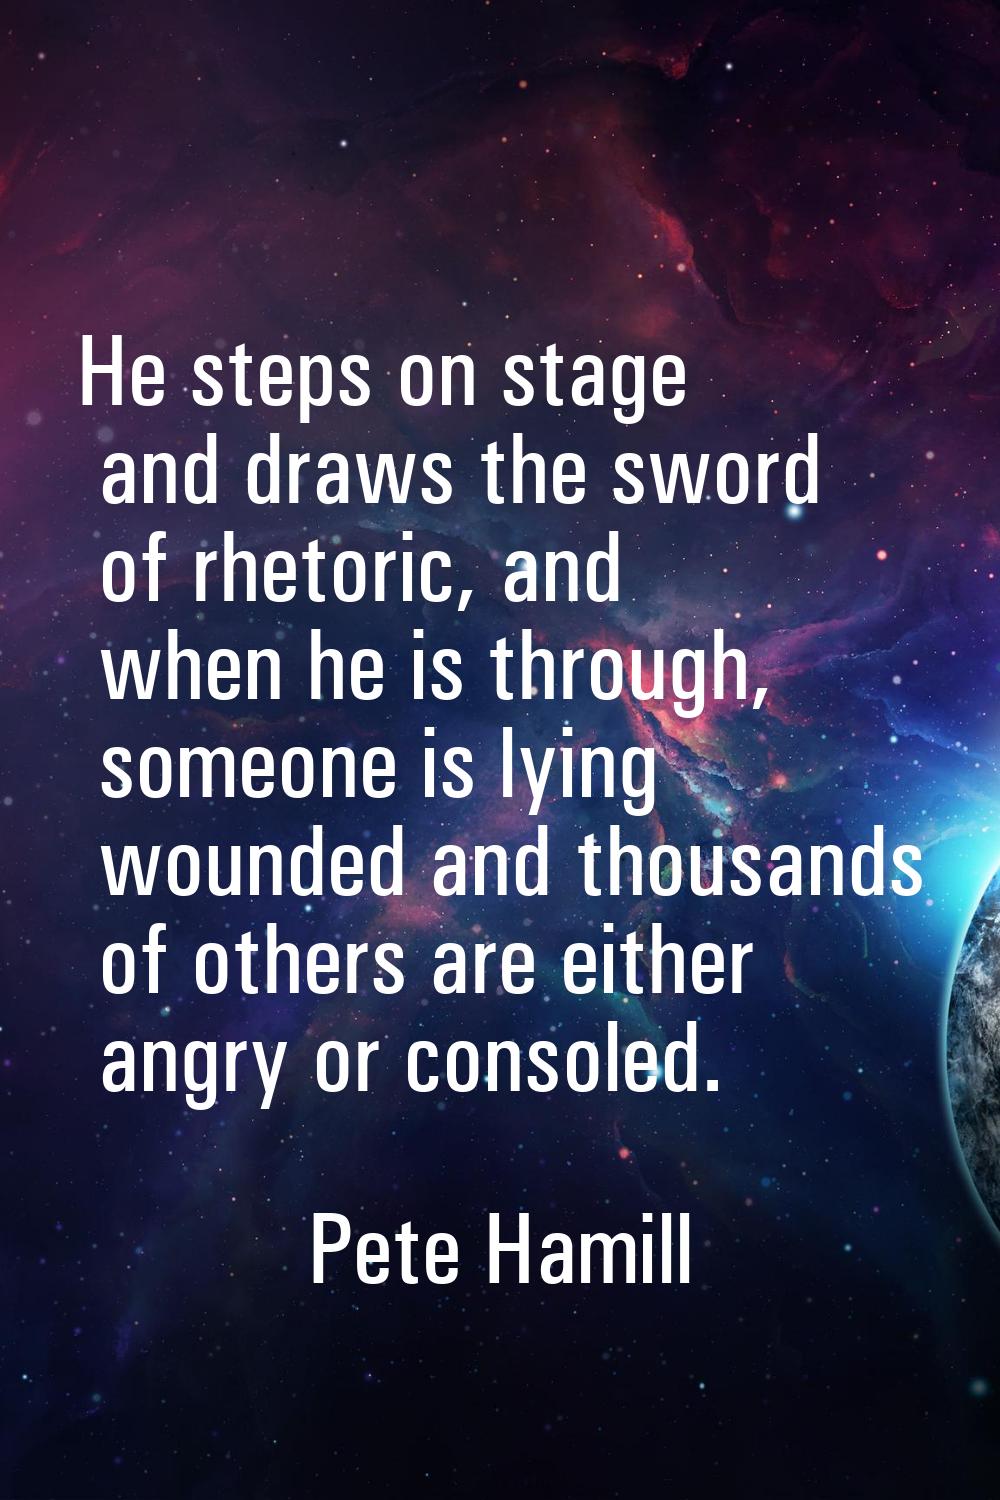 He steps on stage and draws the sword of rhetoric, and when he is through, someone is lying wounded